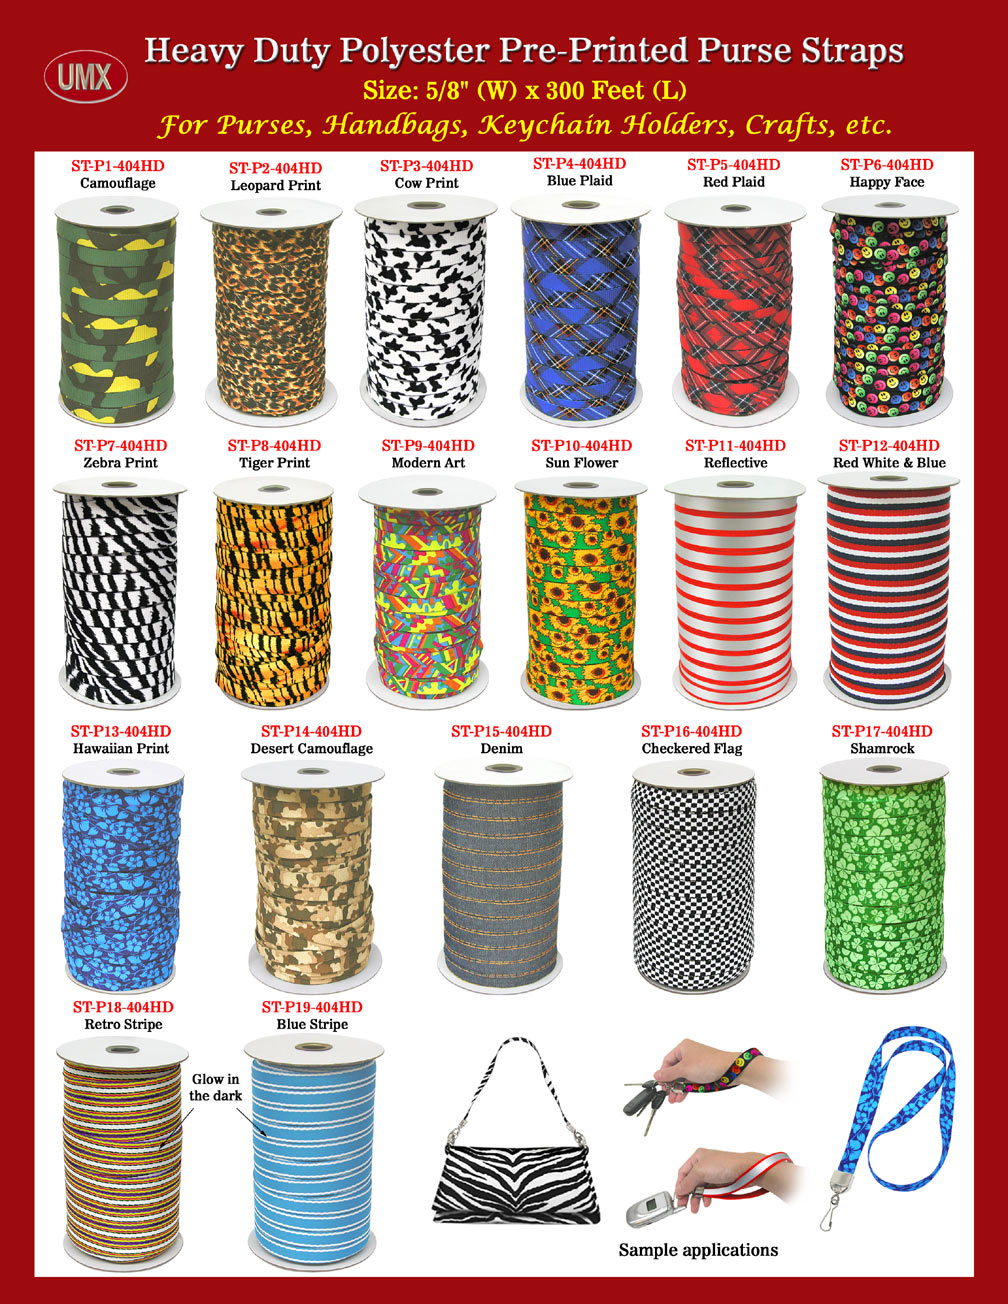 5/8" plain color purse or handbag straps, we stock black, royal blue, red, navy blue, white, yellow, orange, grey, burgundy, pink, dark green, light green, purple and teal colors in our warehouse.